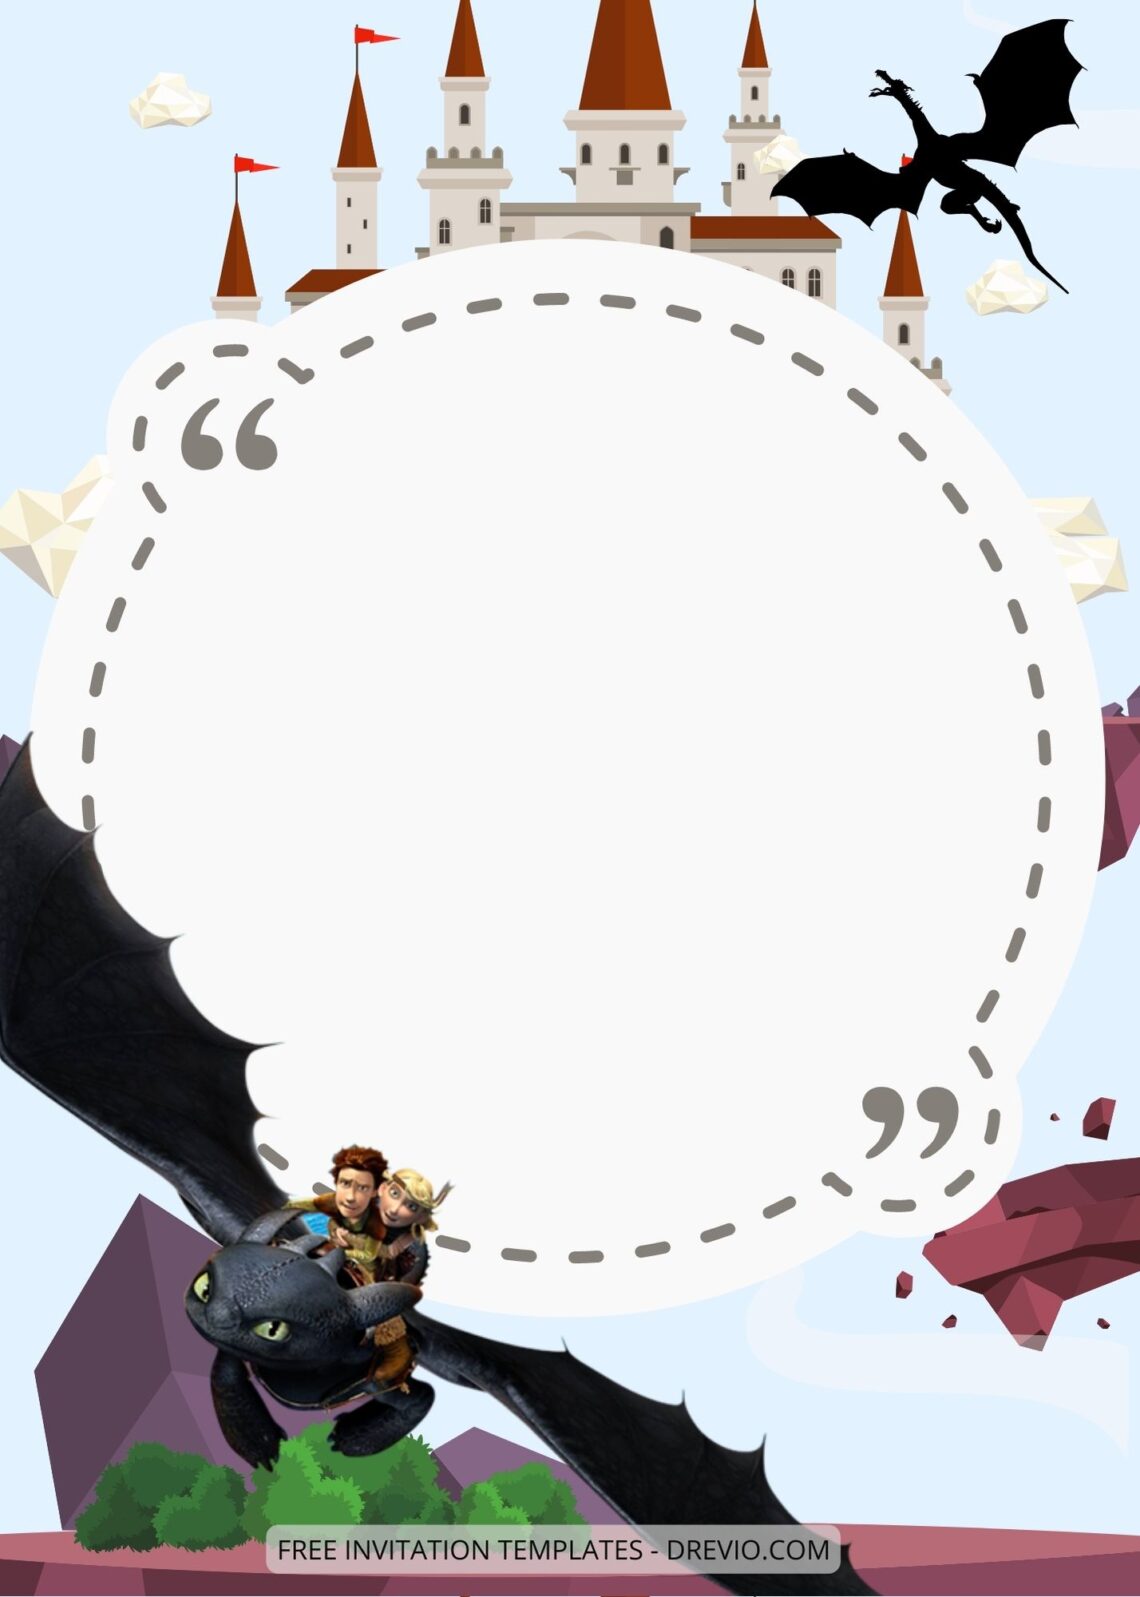 Blank How To Train Your Dragon Canva Birthday Invitation Templates Two